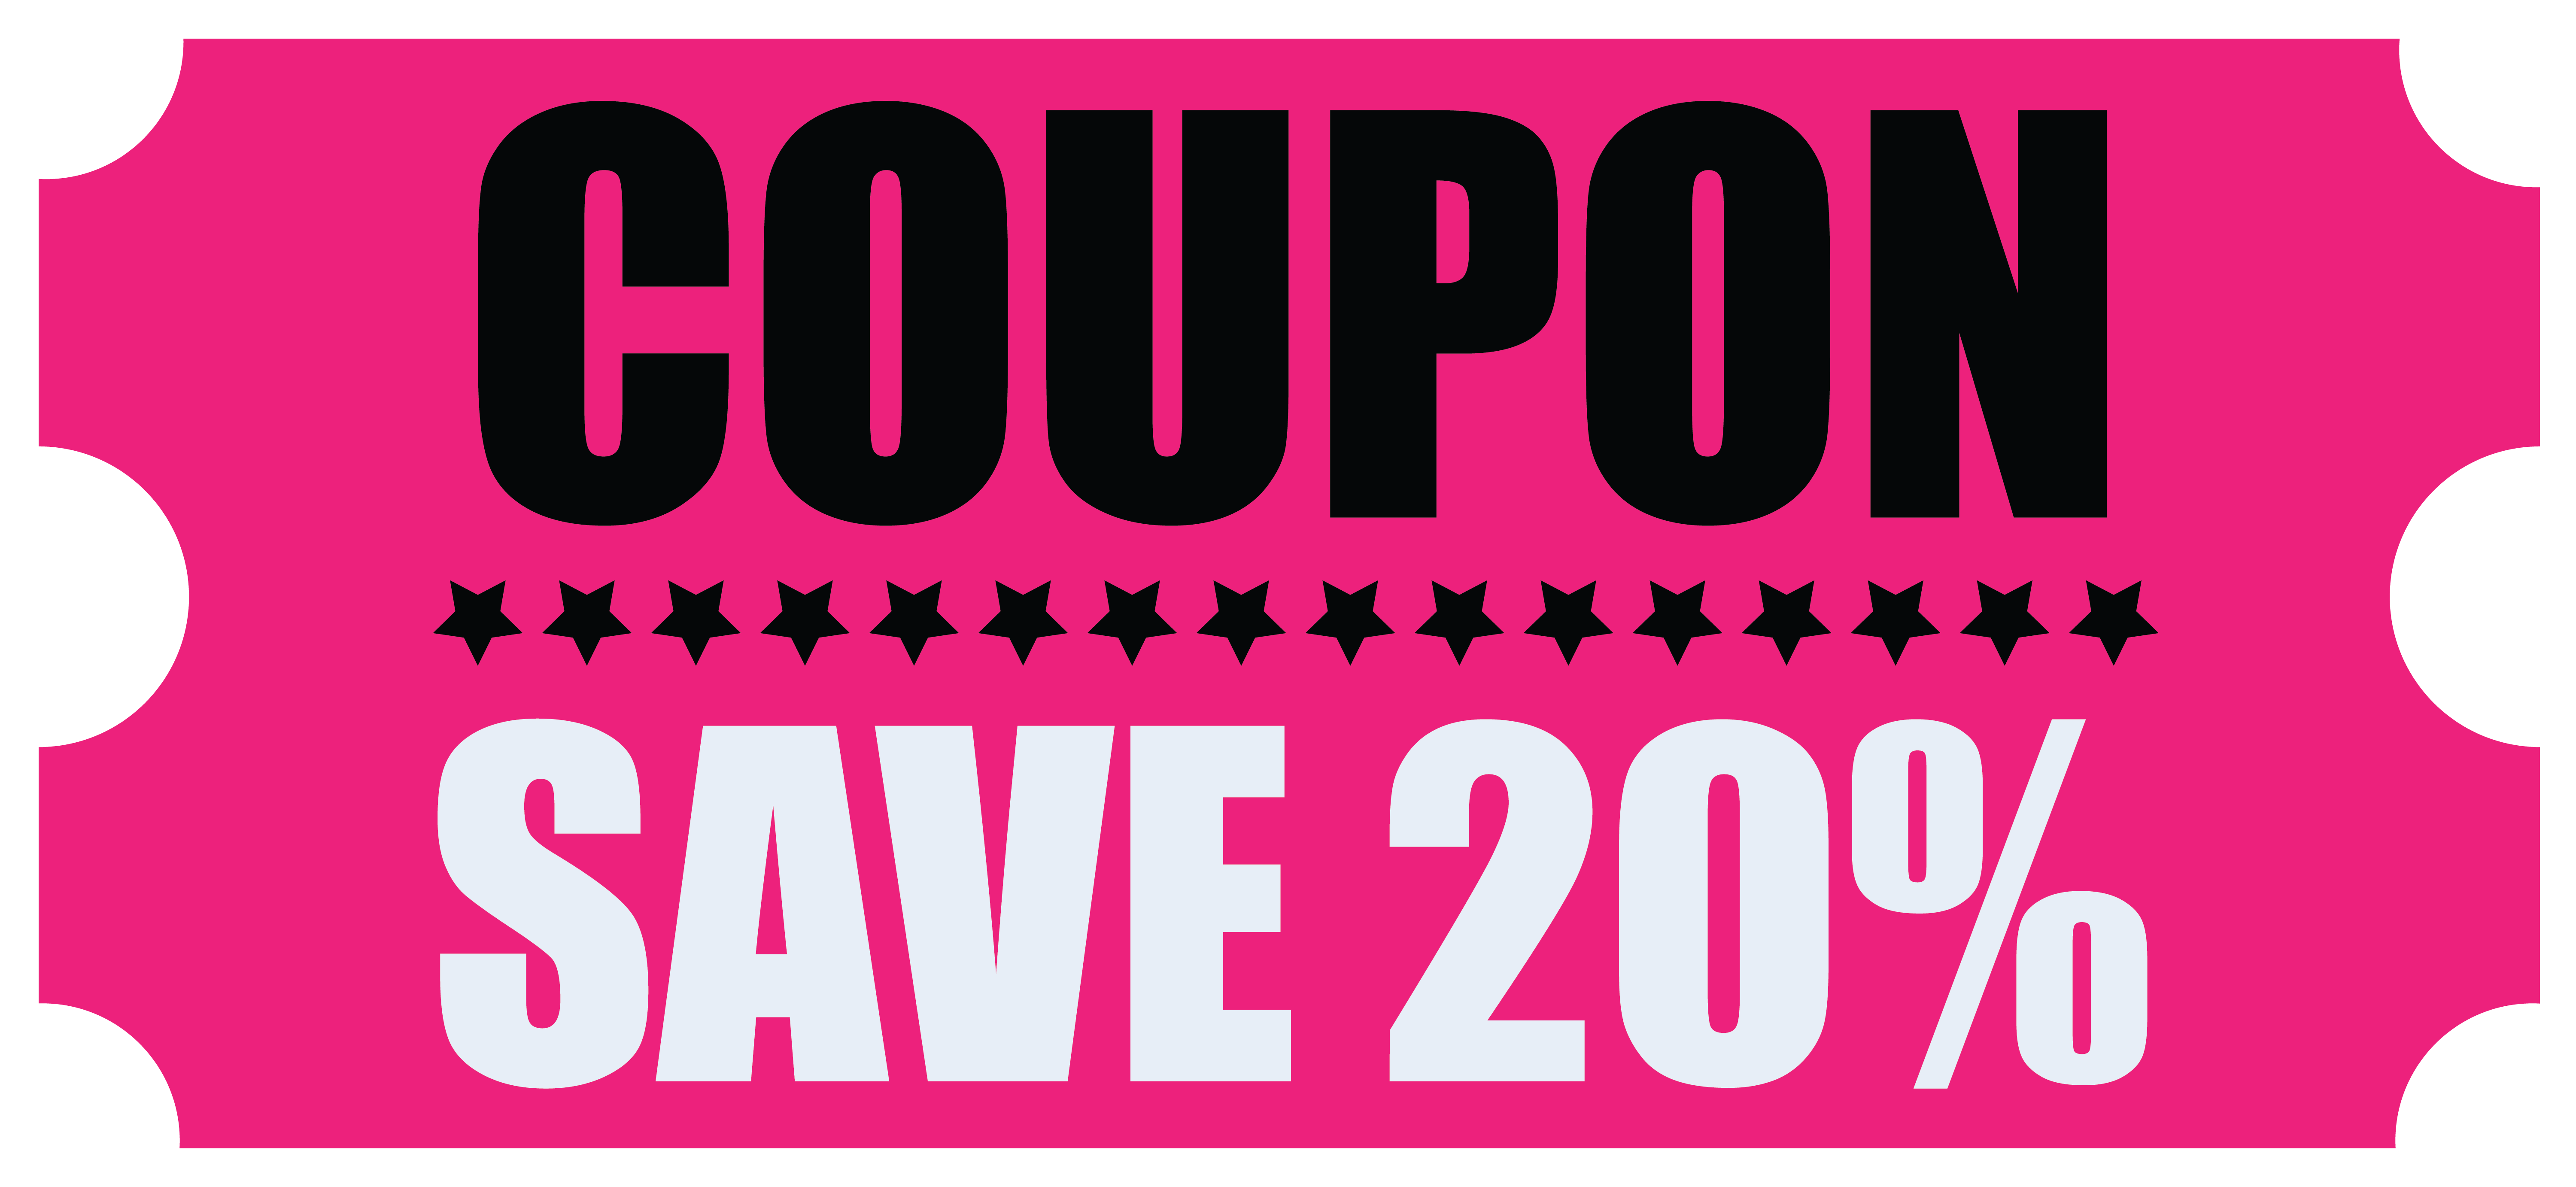 coupon clipart png - Clip Art Library